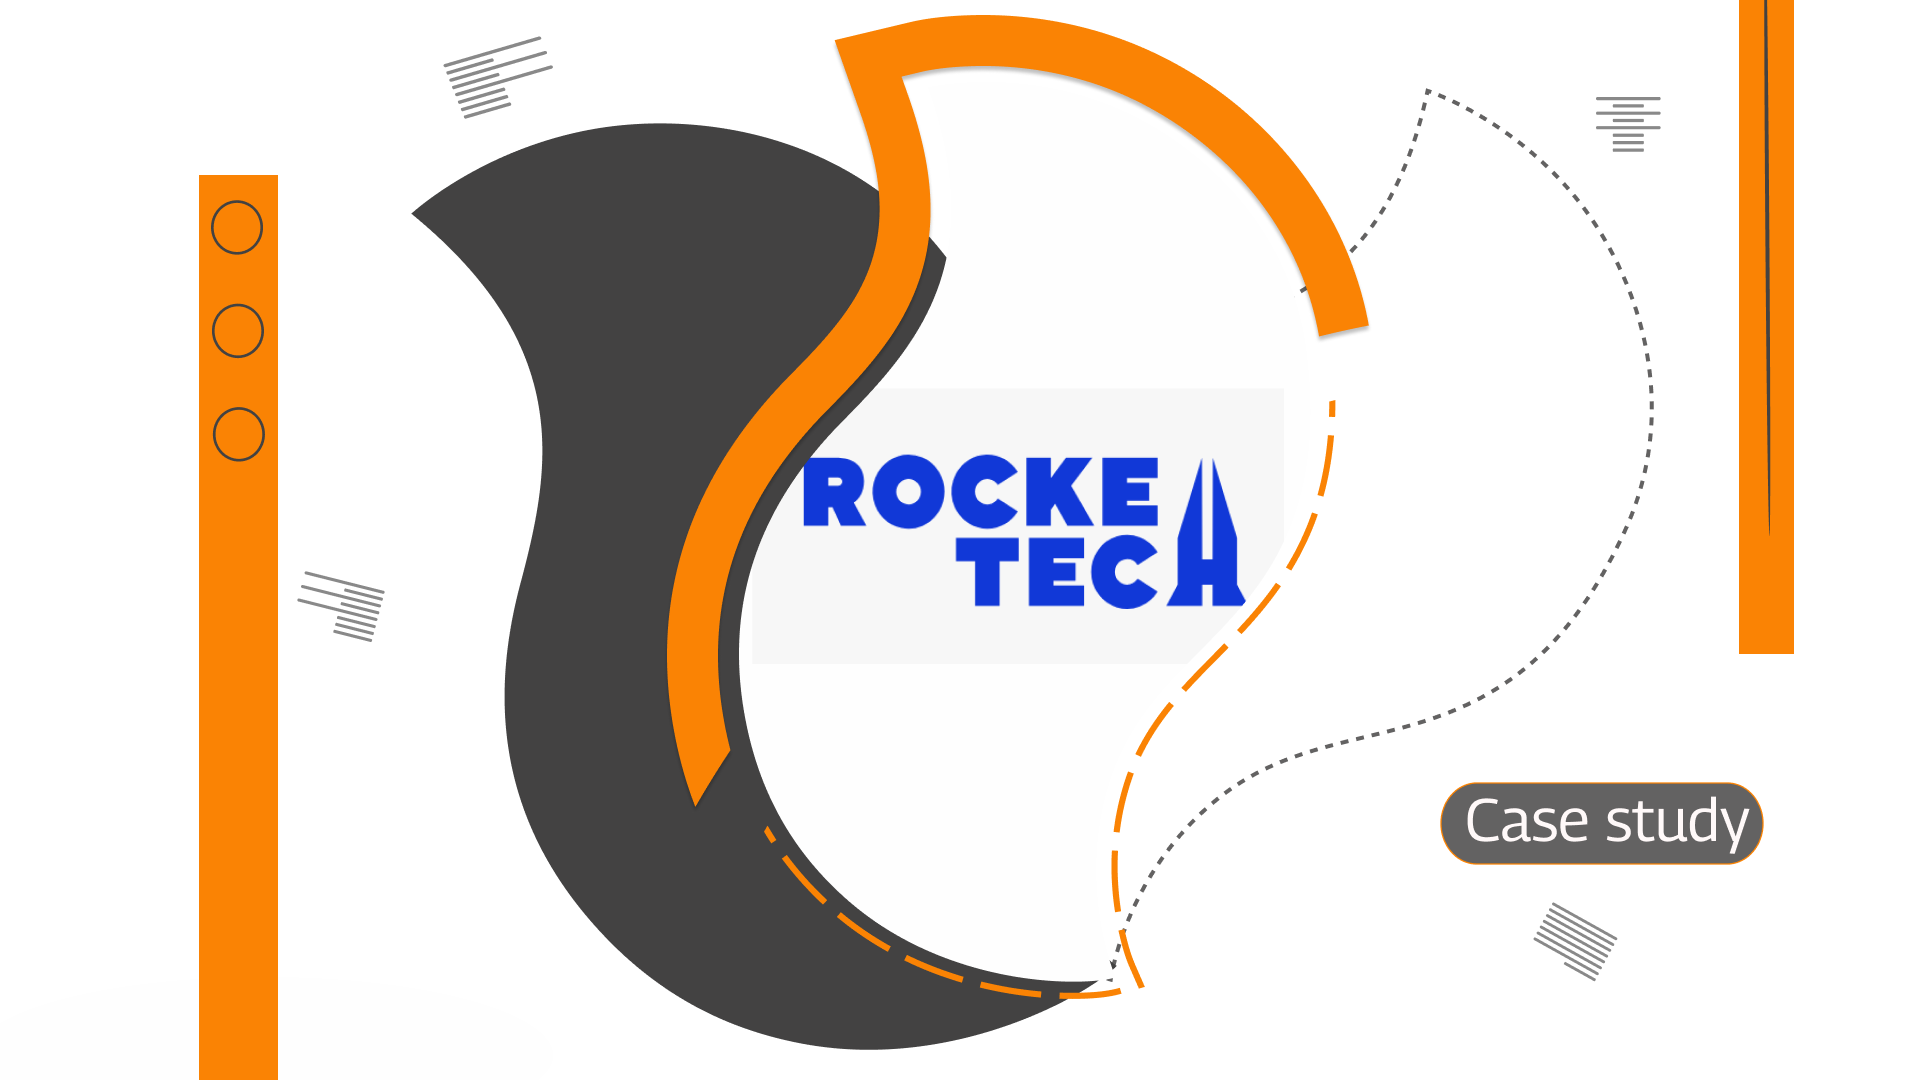 Demonstration of Tech Innovation: Case Studies, Articles, and PR Texts for IT Company Rocketech